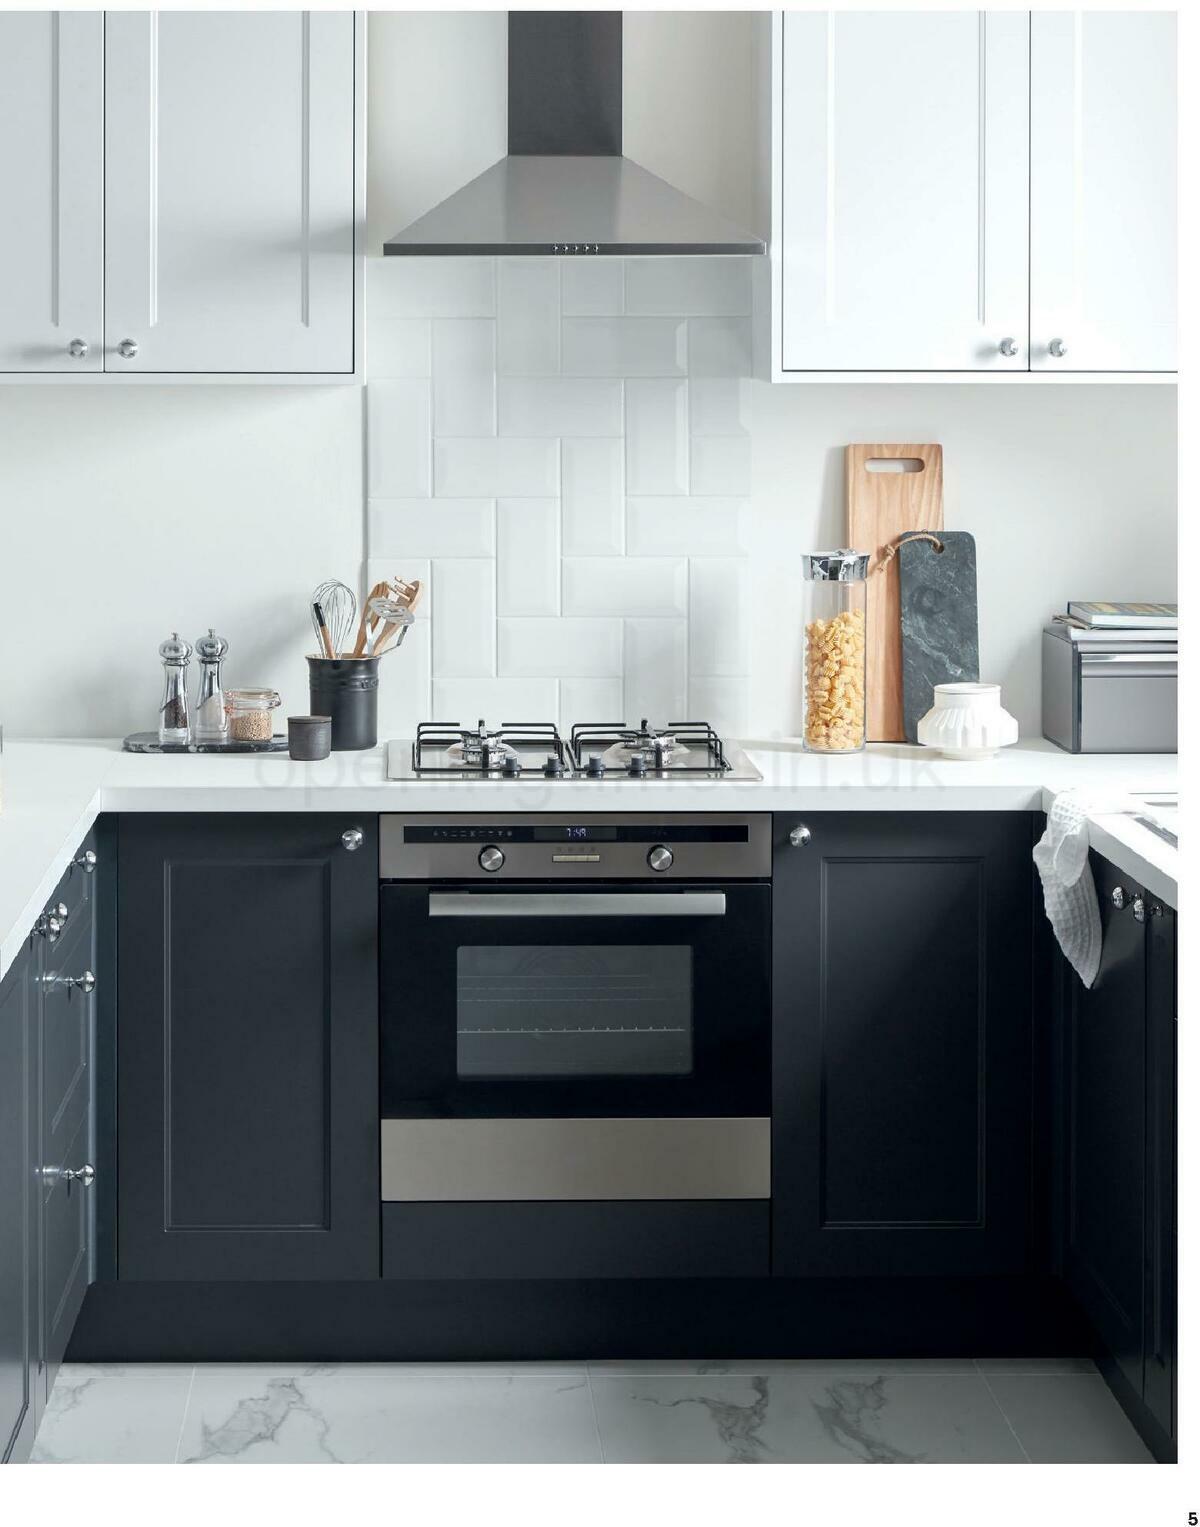 B&Q Kitchens Inspiration Offers from 1 September